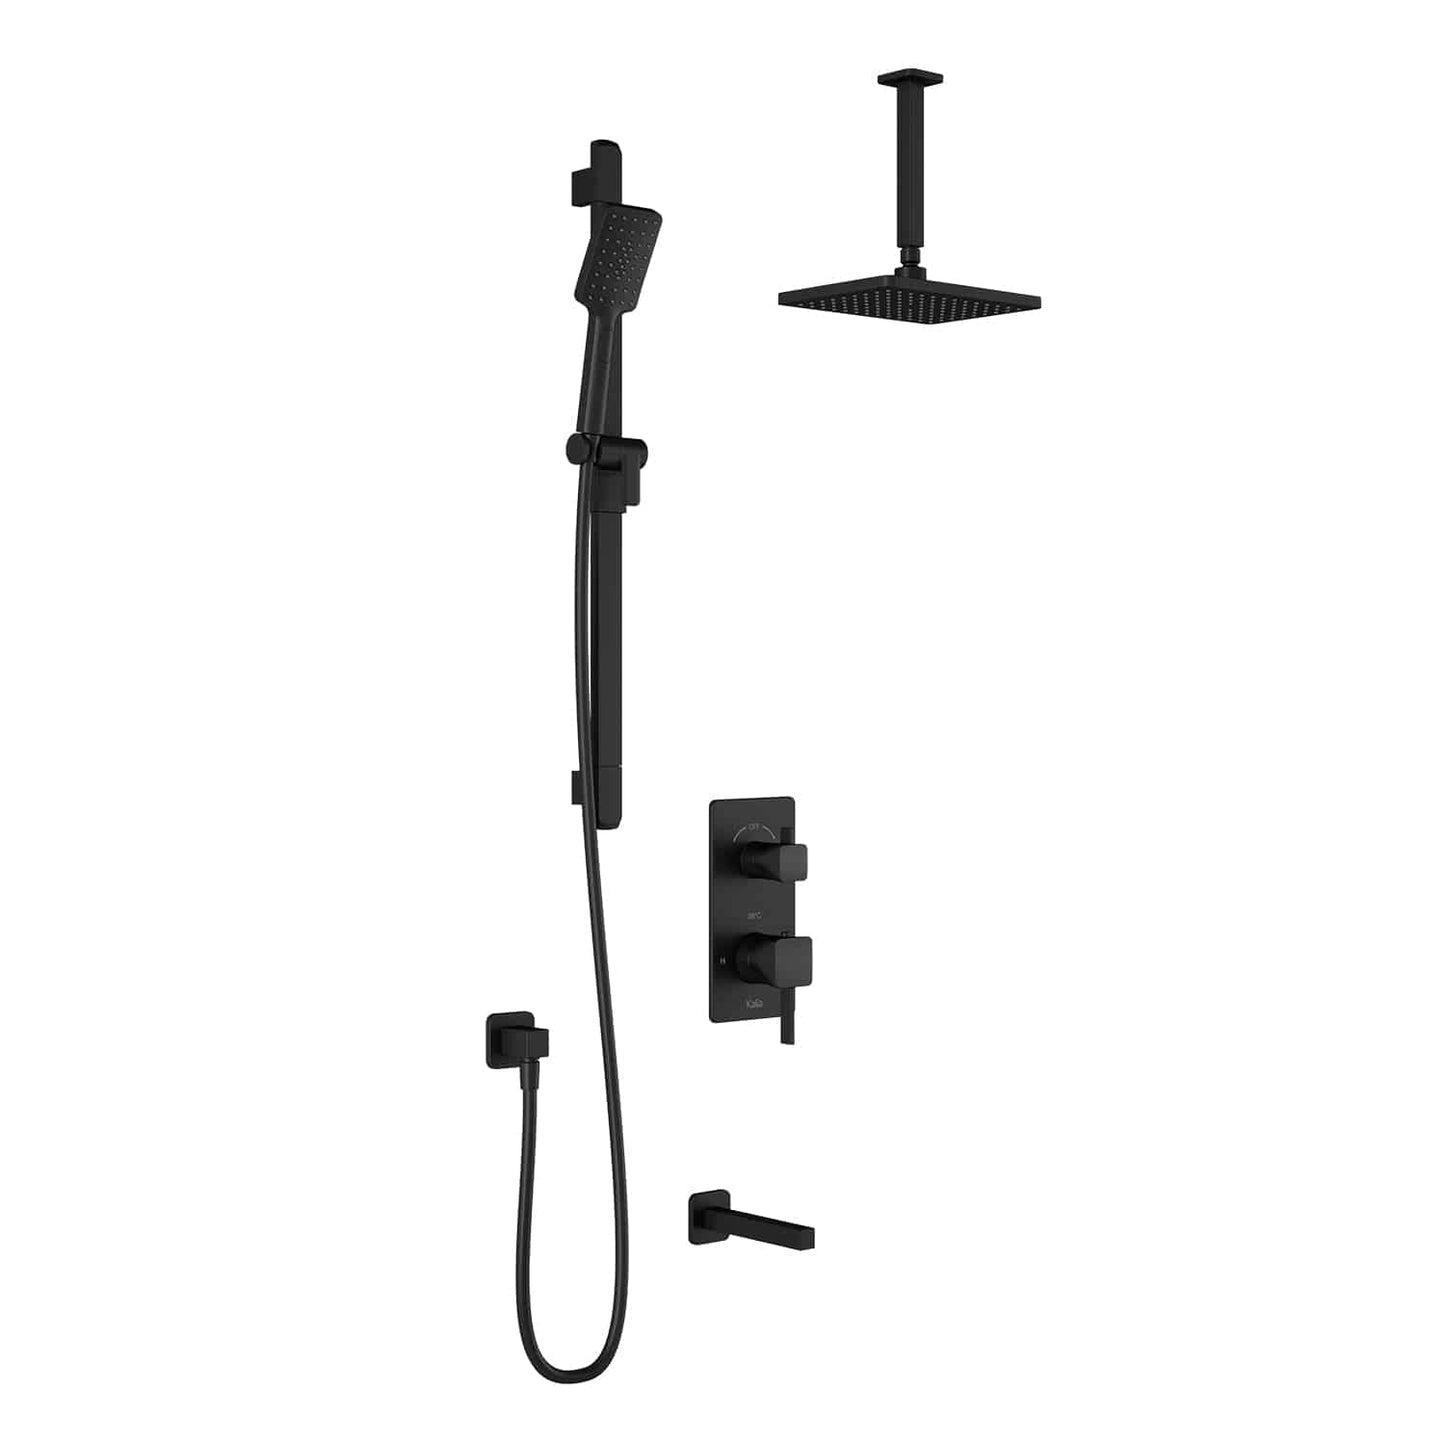 Kalia SquareOne TD3 (Valve Not Included) AQUATONIK T/P with Diverter Shower System with 10-1/4" Shower Head with Vertical Ceiling Arm -Matte Black